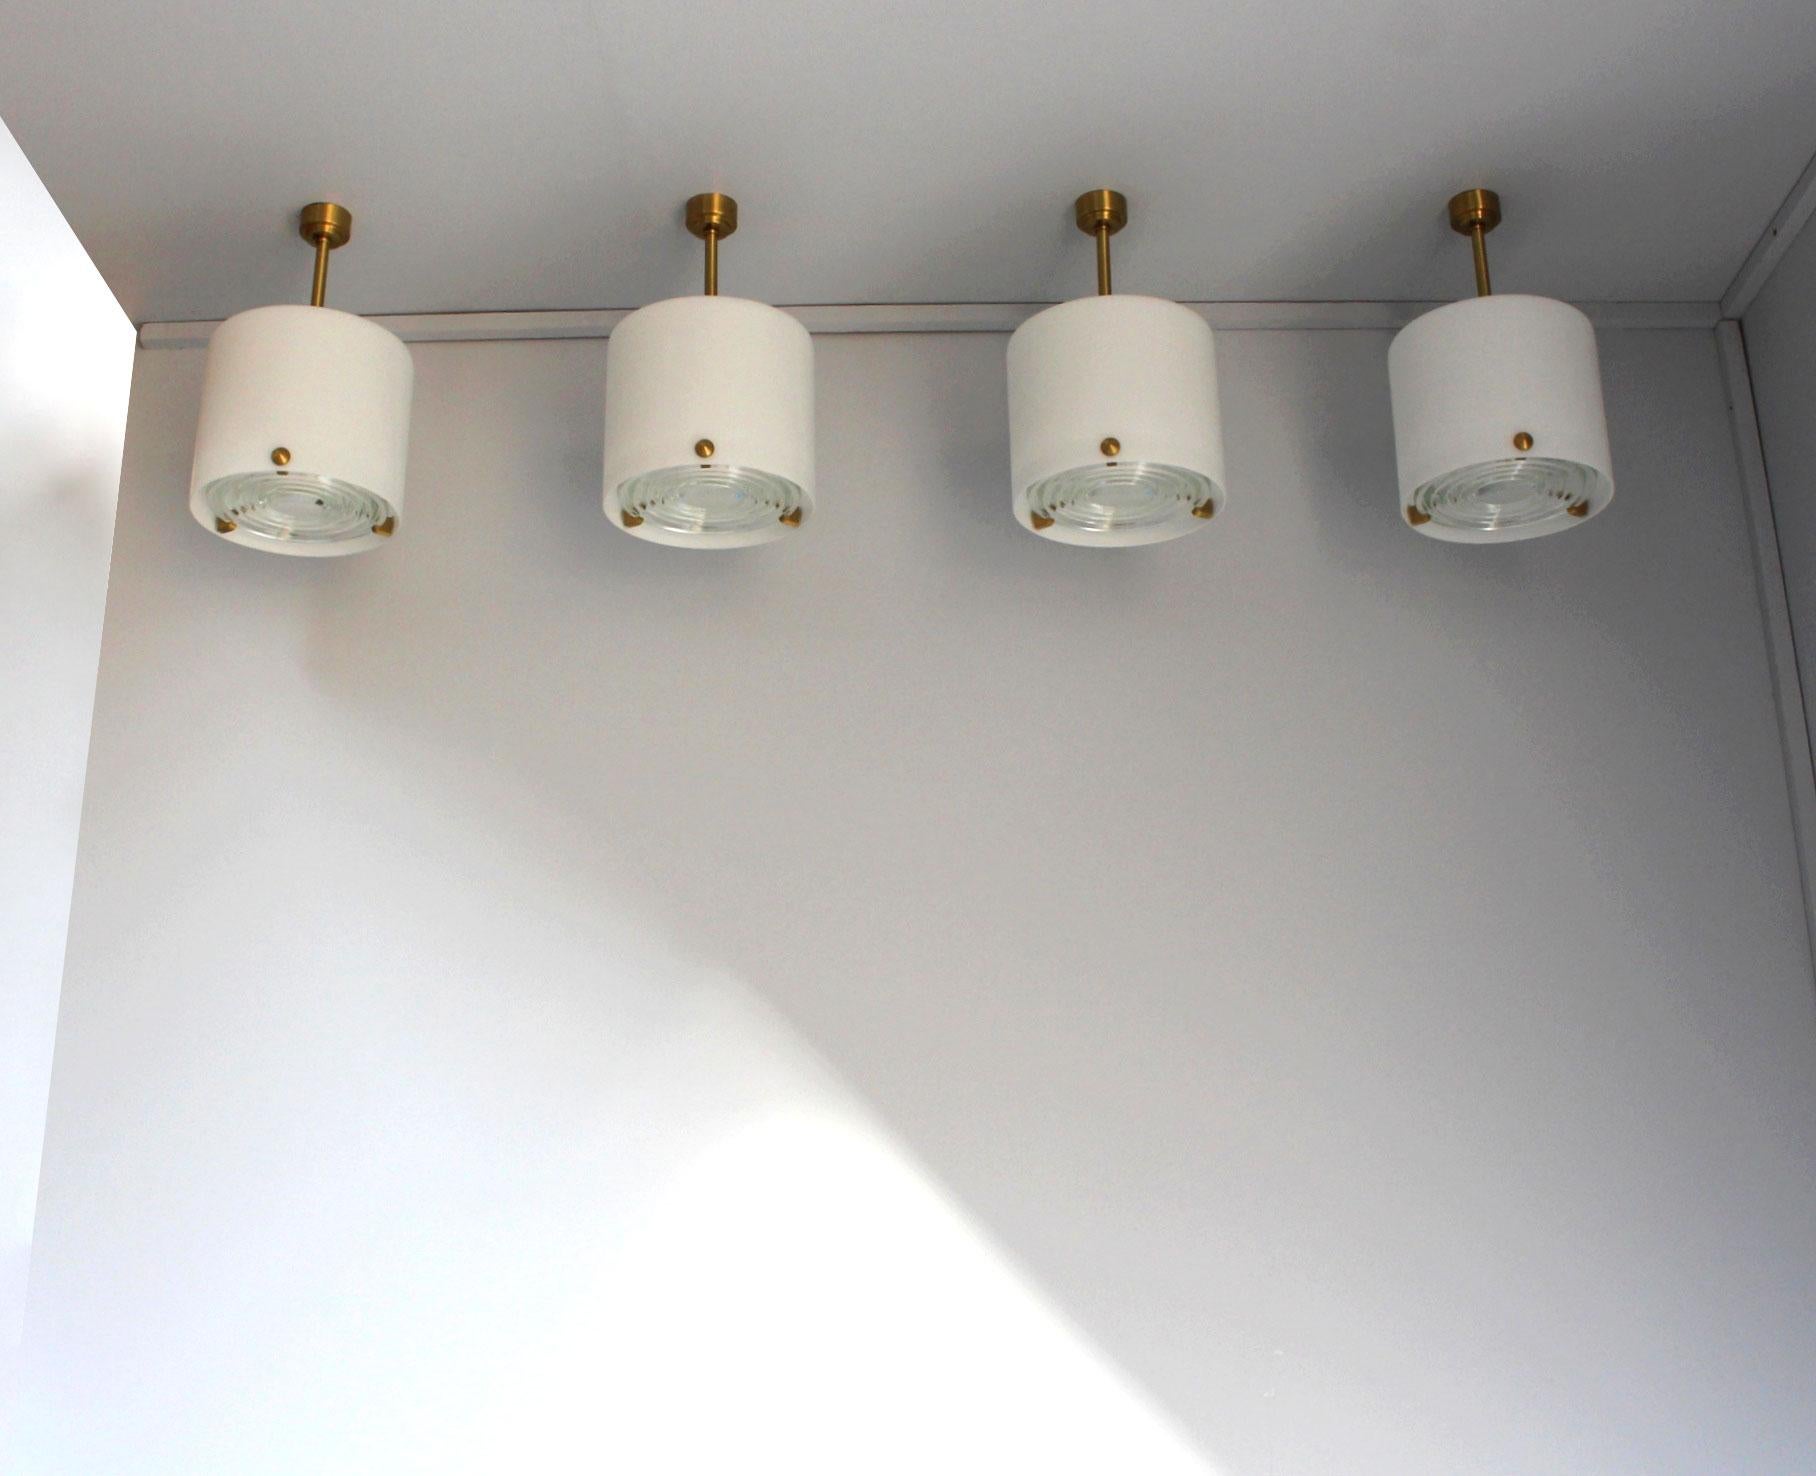 Jean Perzel: A set of four fine French midcentury cylinder-shaped chandeliers/pendants with a white satin laminated glass shade, a bronze canopy, stem and 3 studs that support a prismatic glass lens.